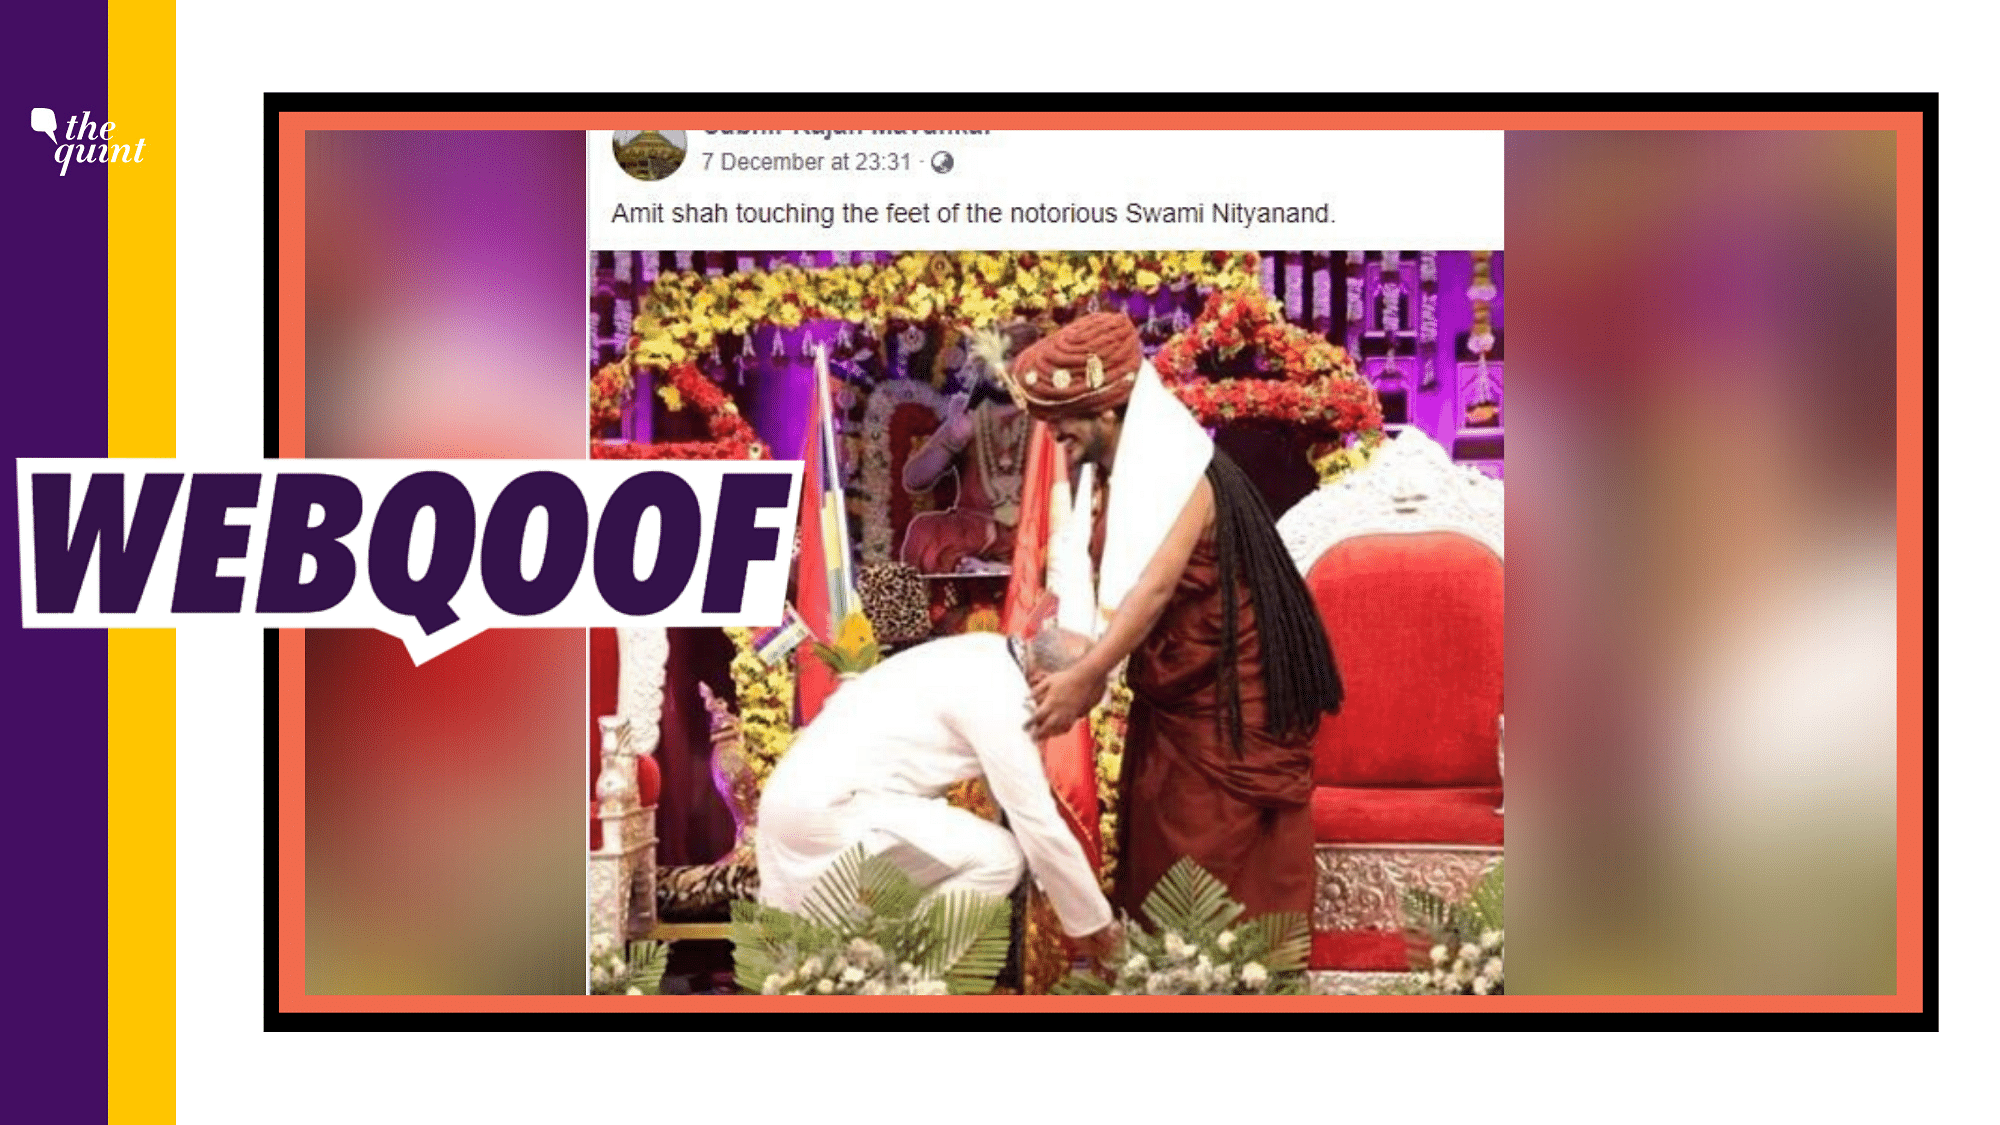 A photo of self-styled godman Swami Nithyananda is viral on Facebook with the claim that it shows Home Minister Amit Shah touching his feet.